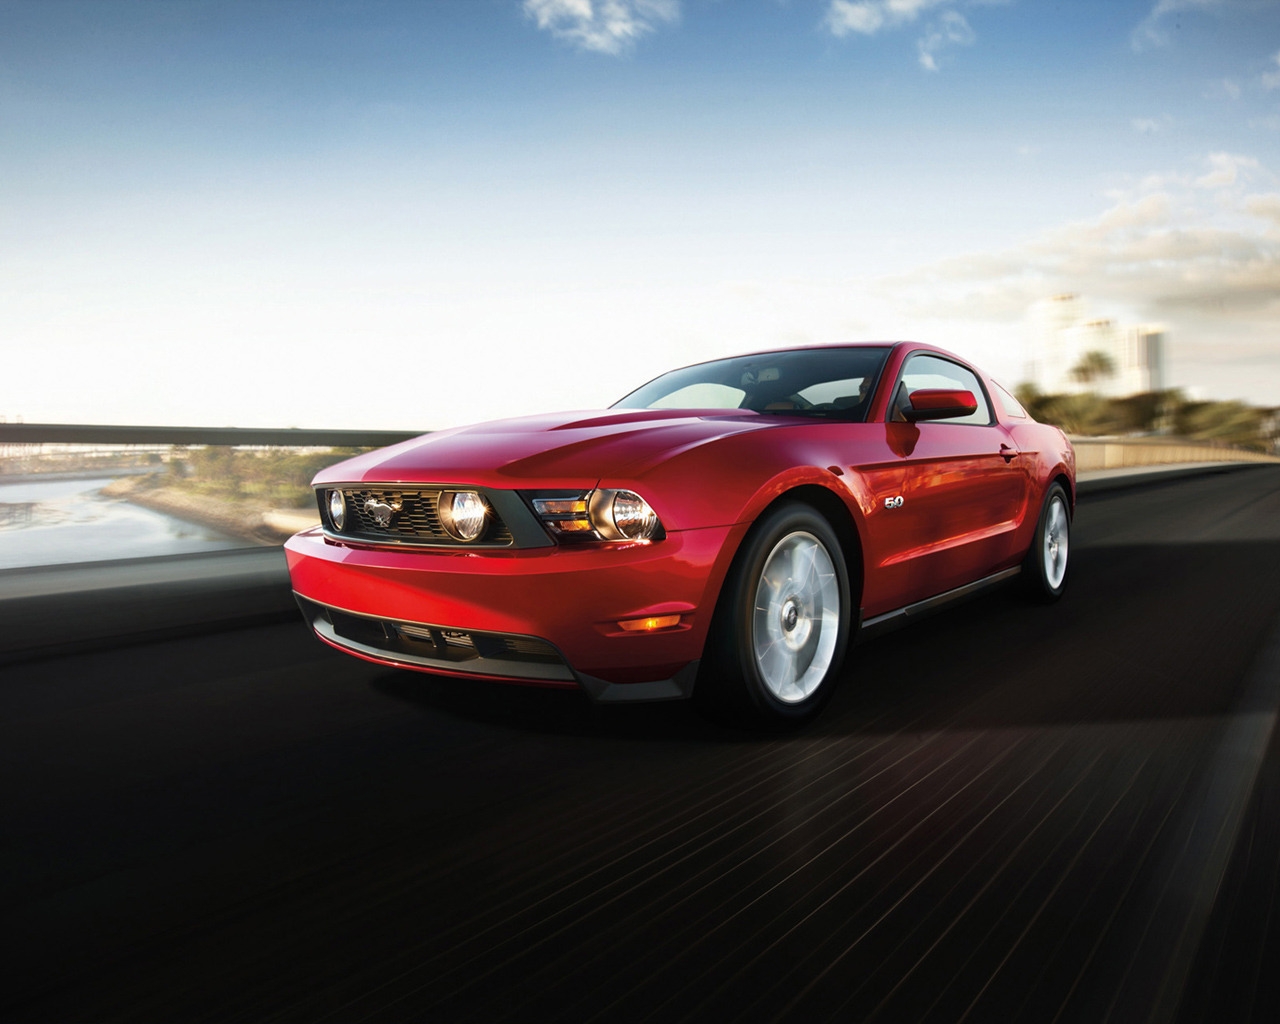 Ford Mustang GT 2012 for 1280 x 1024 resolution